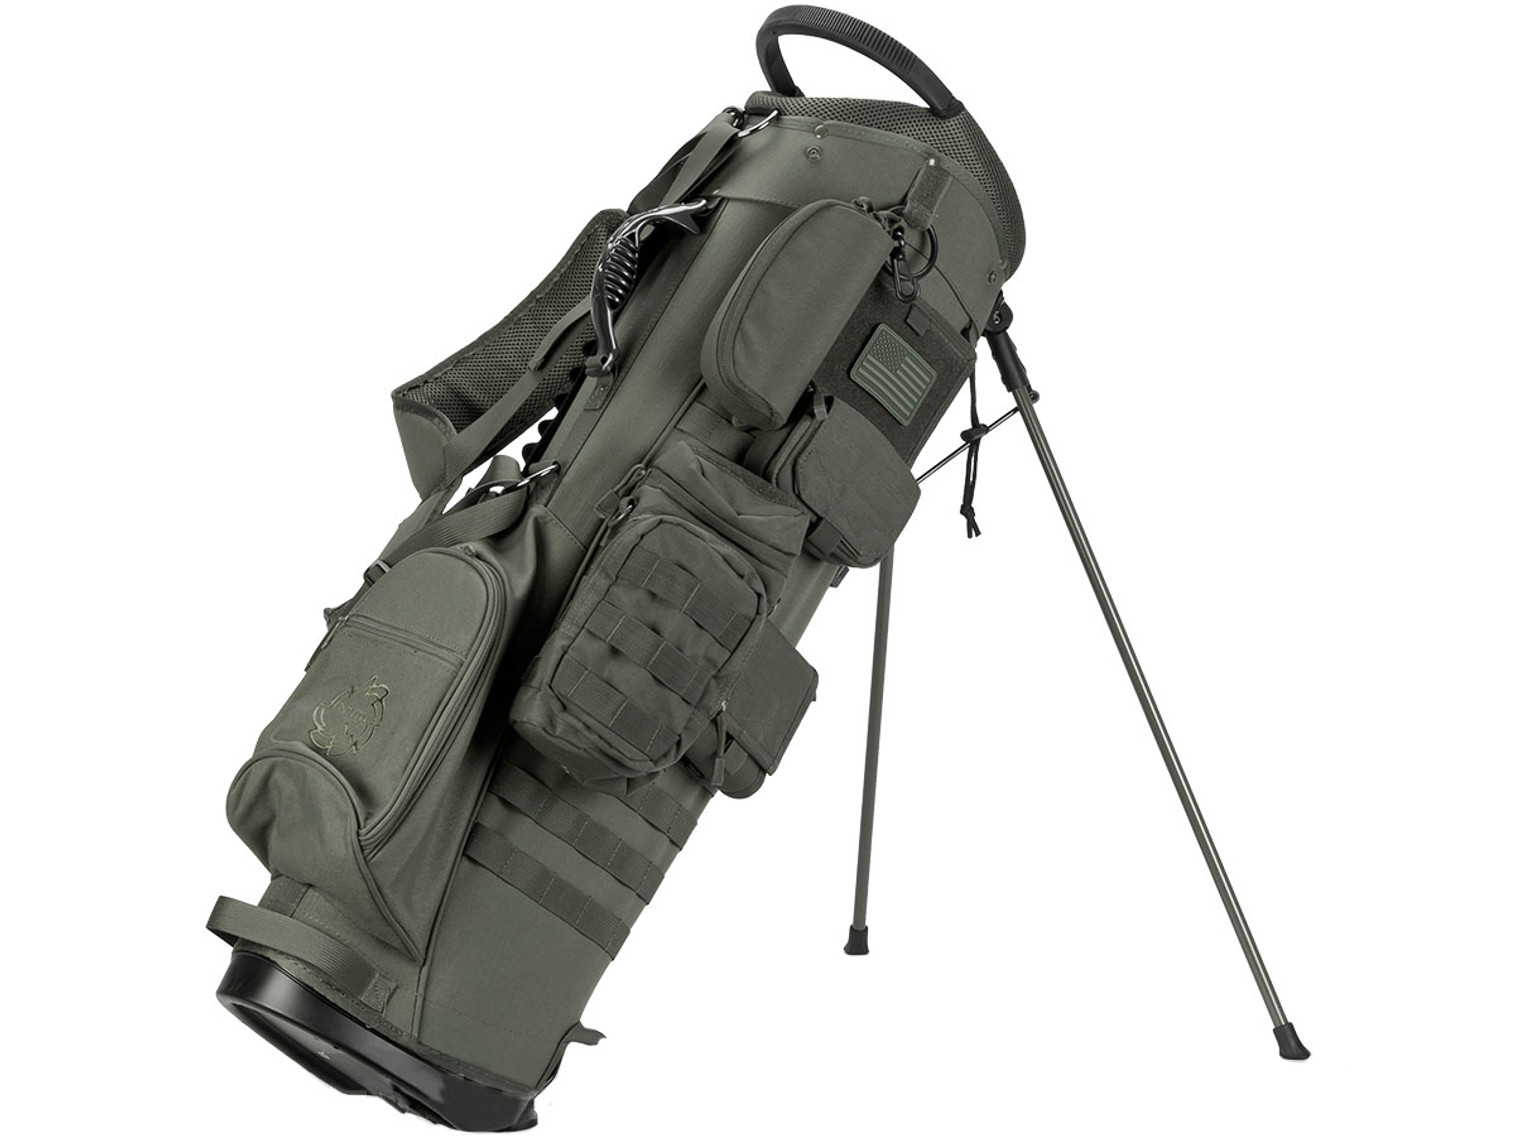 Tacticool BAMF Golf Bag - Expeditionary (Coyote Brown) - Hero Outdoors